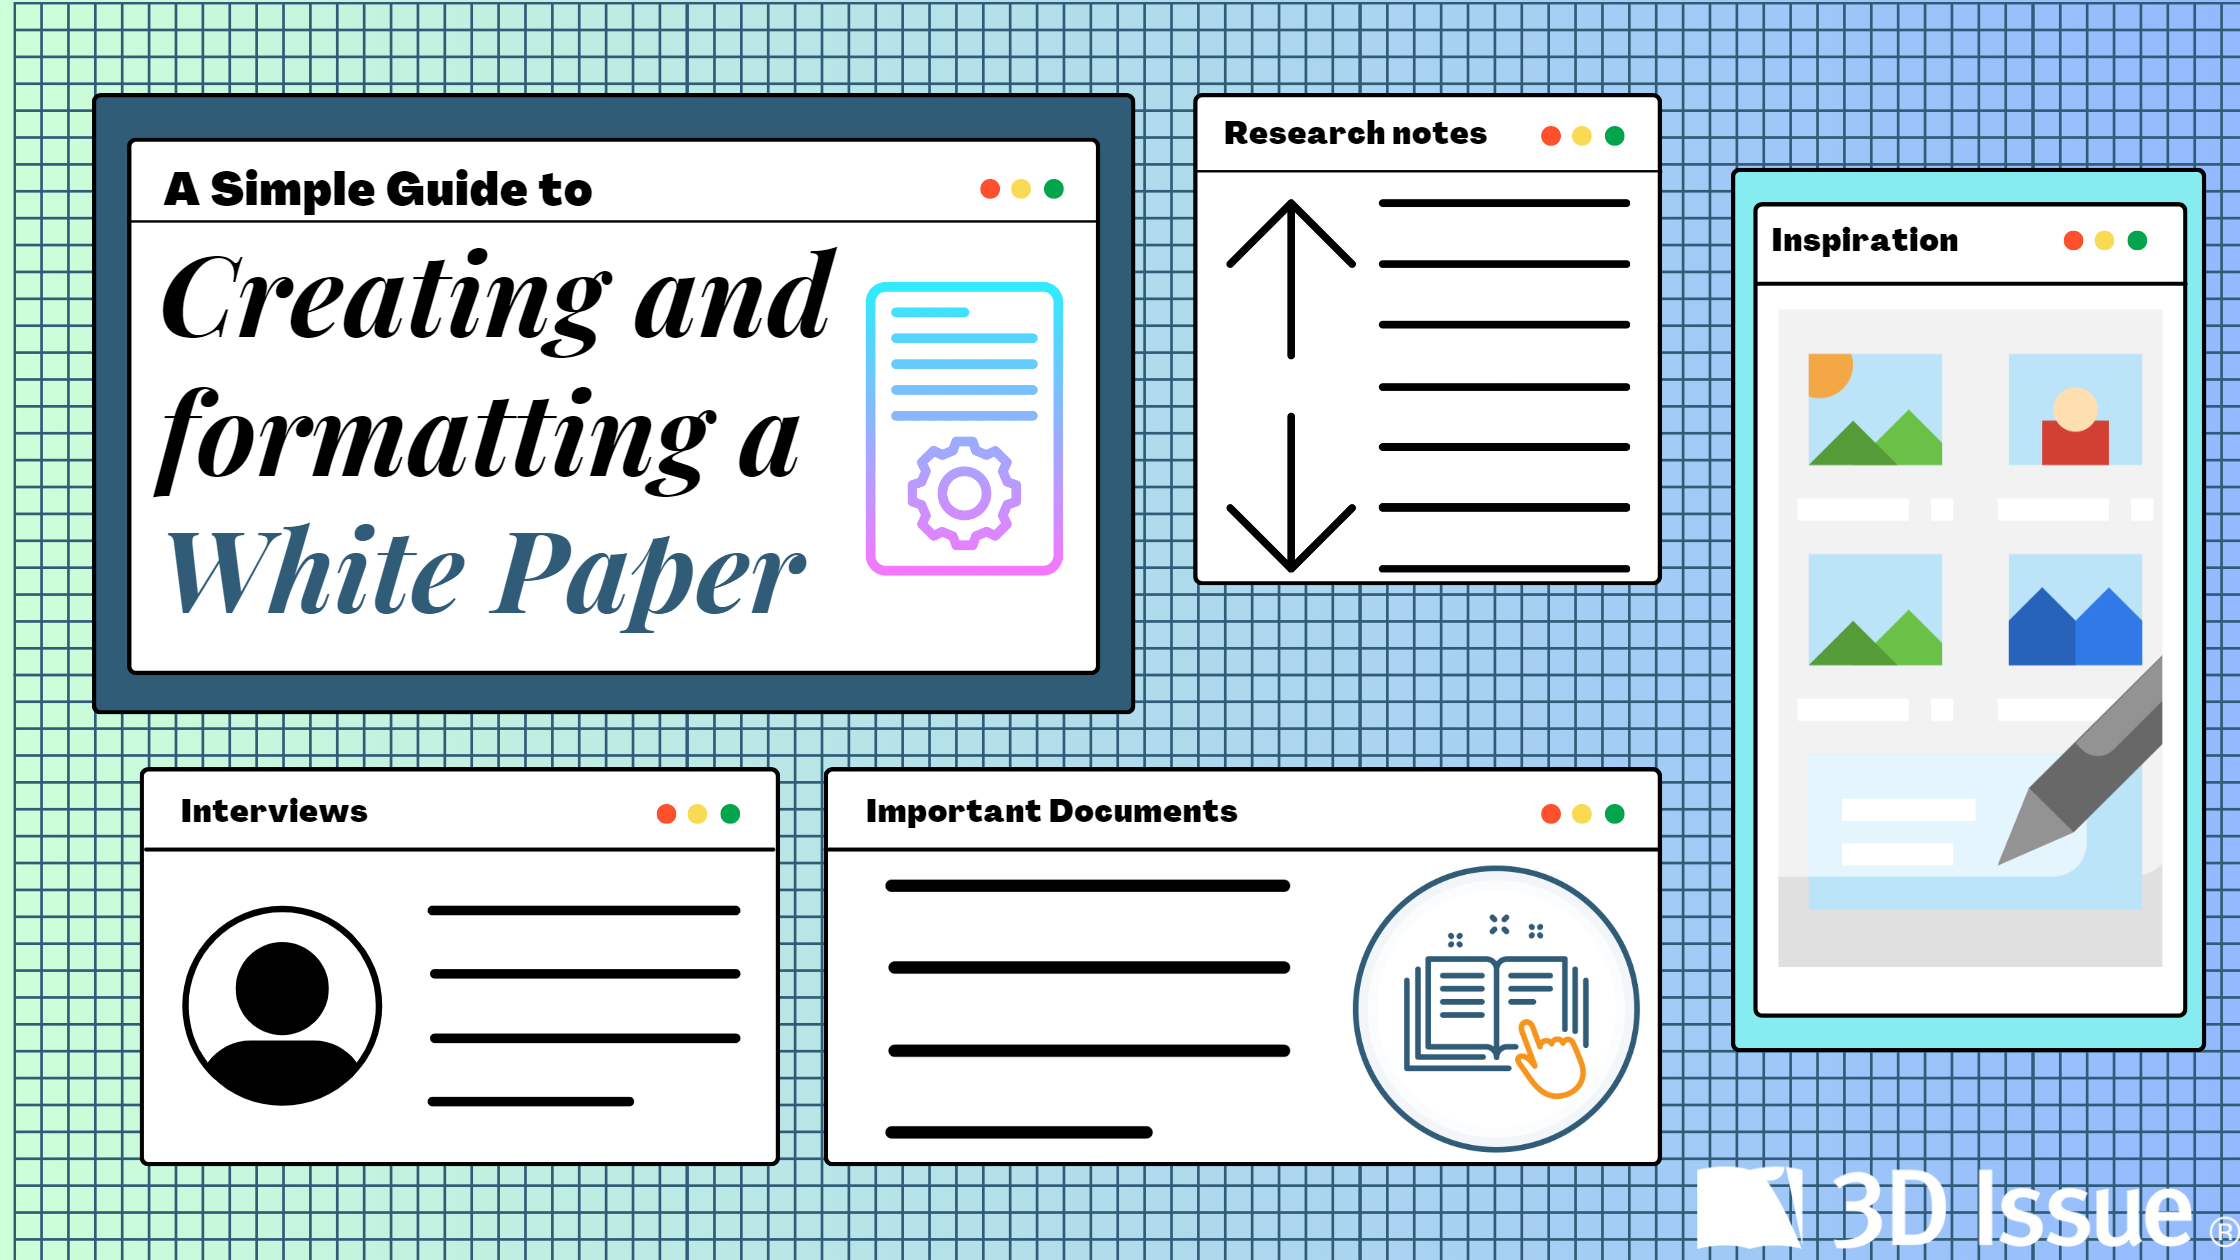 A Simple Guide to Creating and Formatting a White Paper